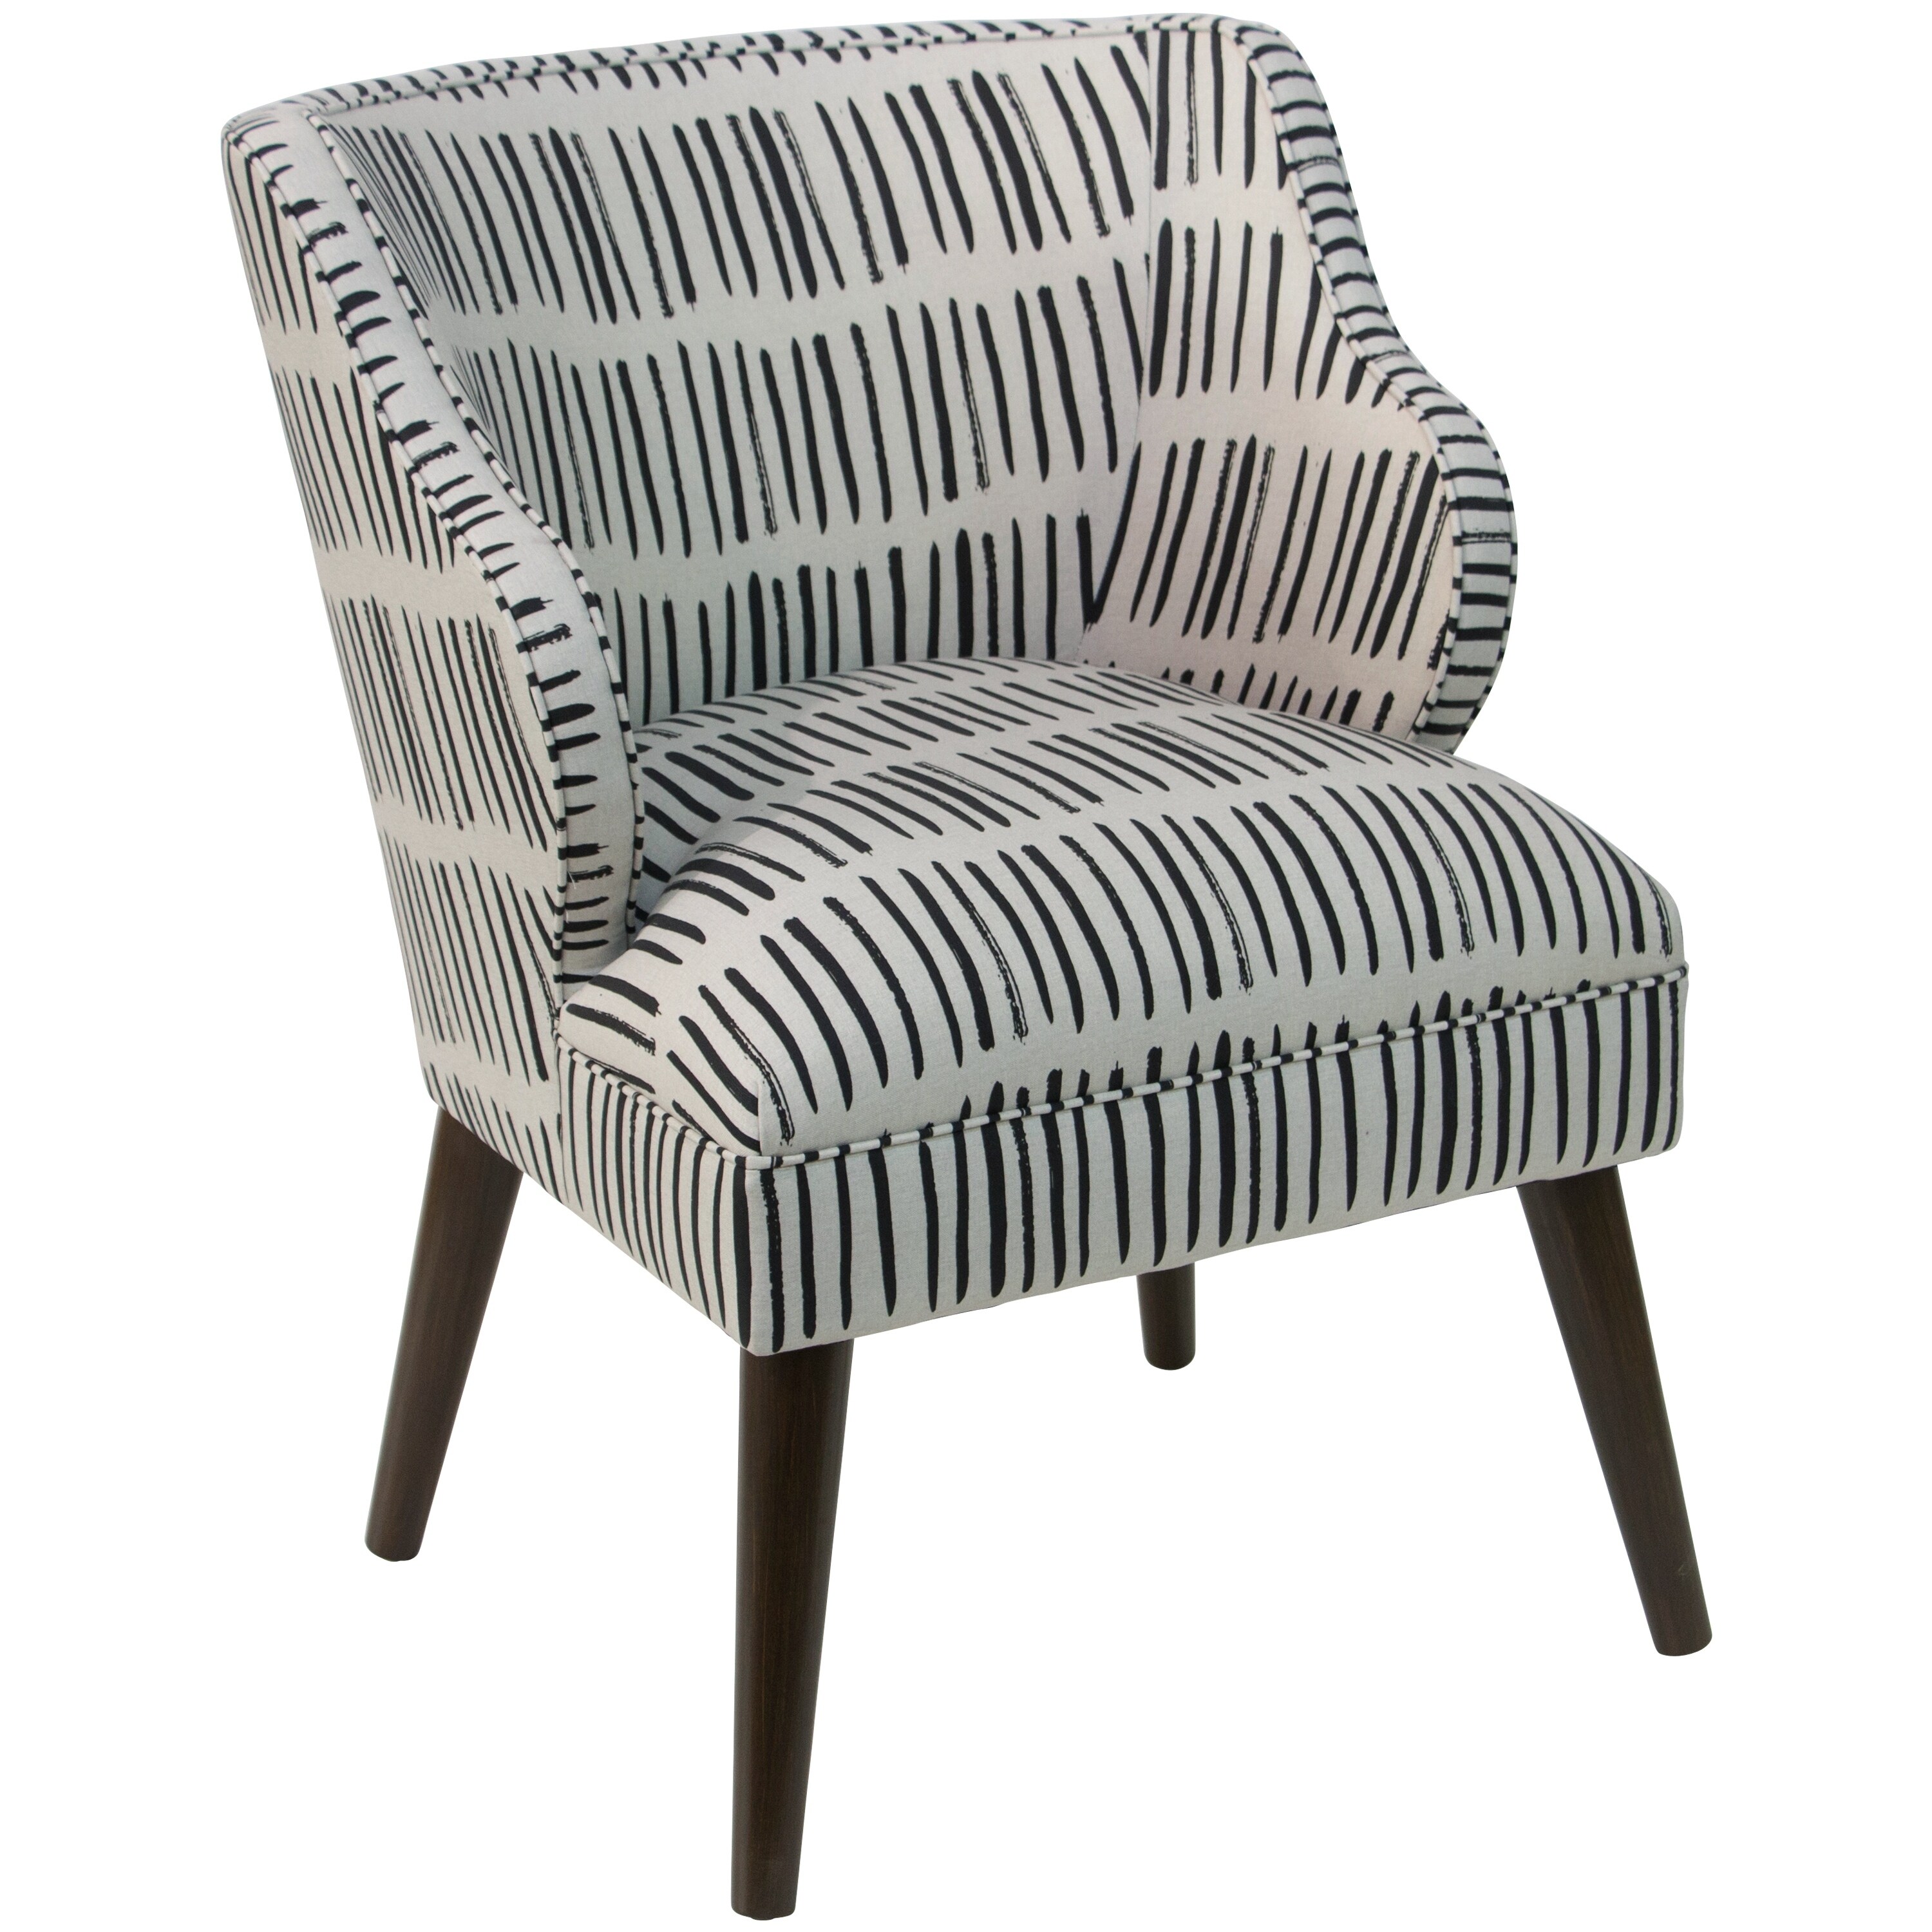 Featured image of post Black And White Chair Pic - Pair it with black metal chairs, glass jars, black framed windows and a concrete floor for a look.